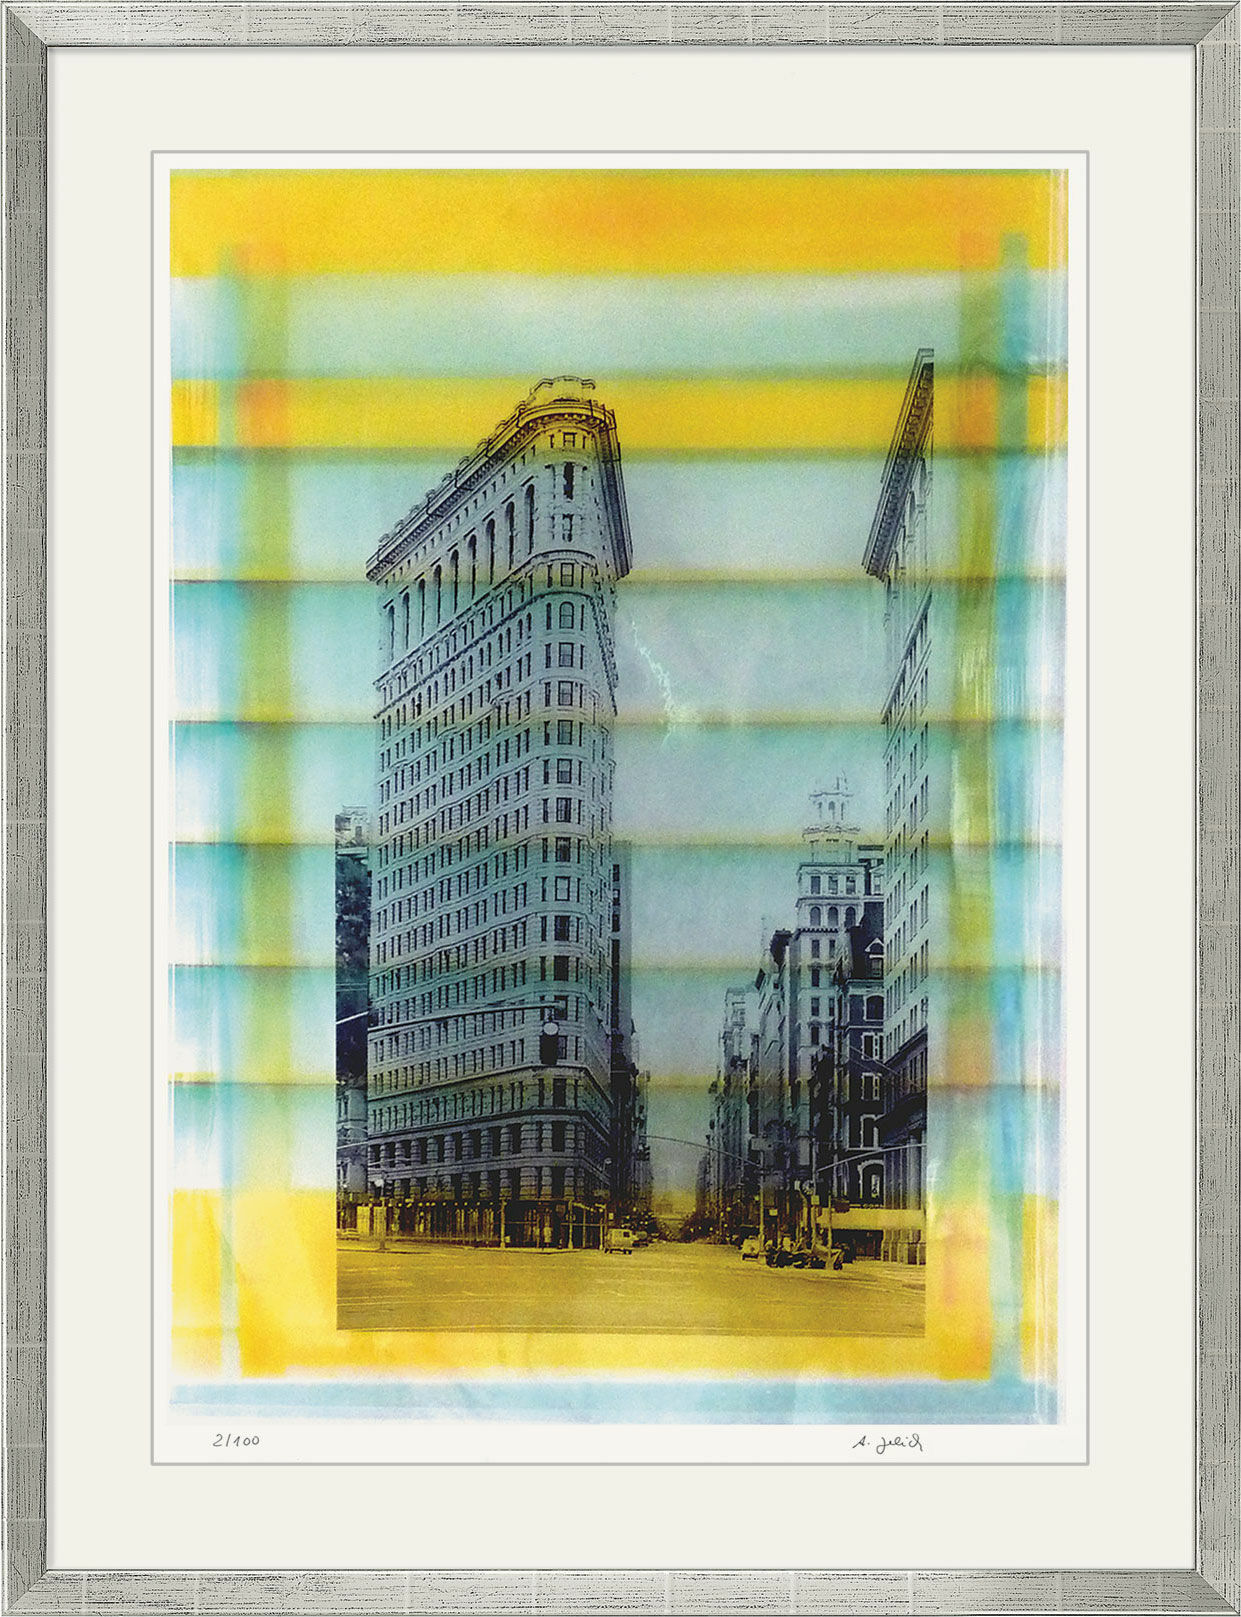 Picture "Flat Iron Building New York" (2009) by Angelika Jelich